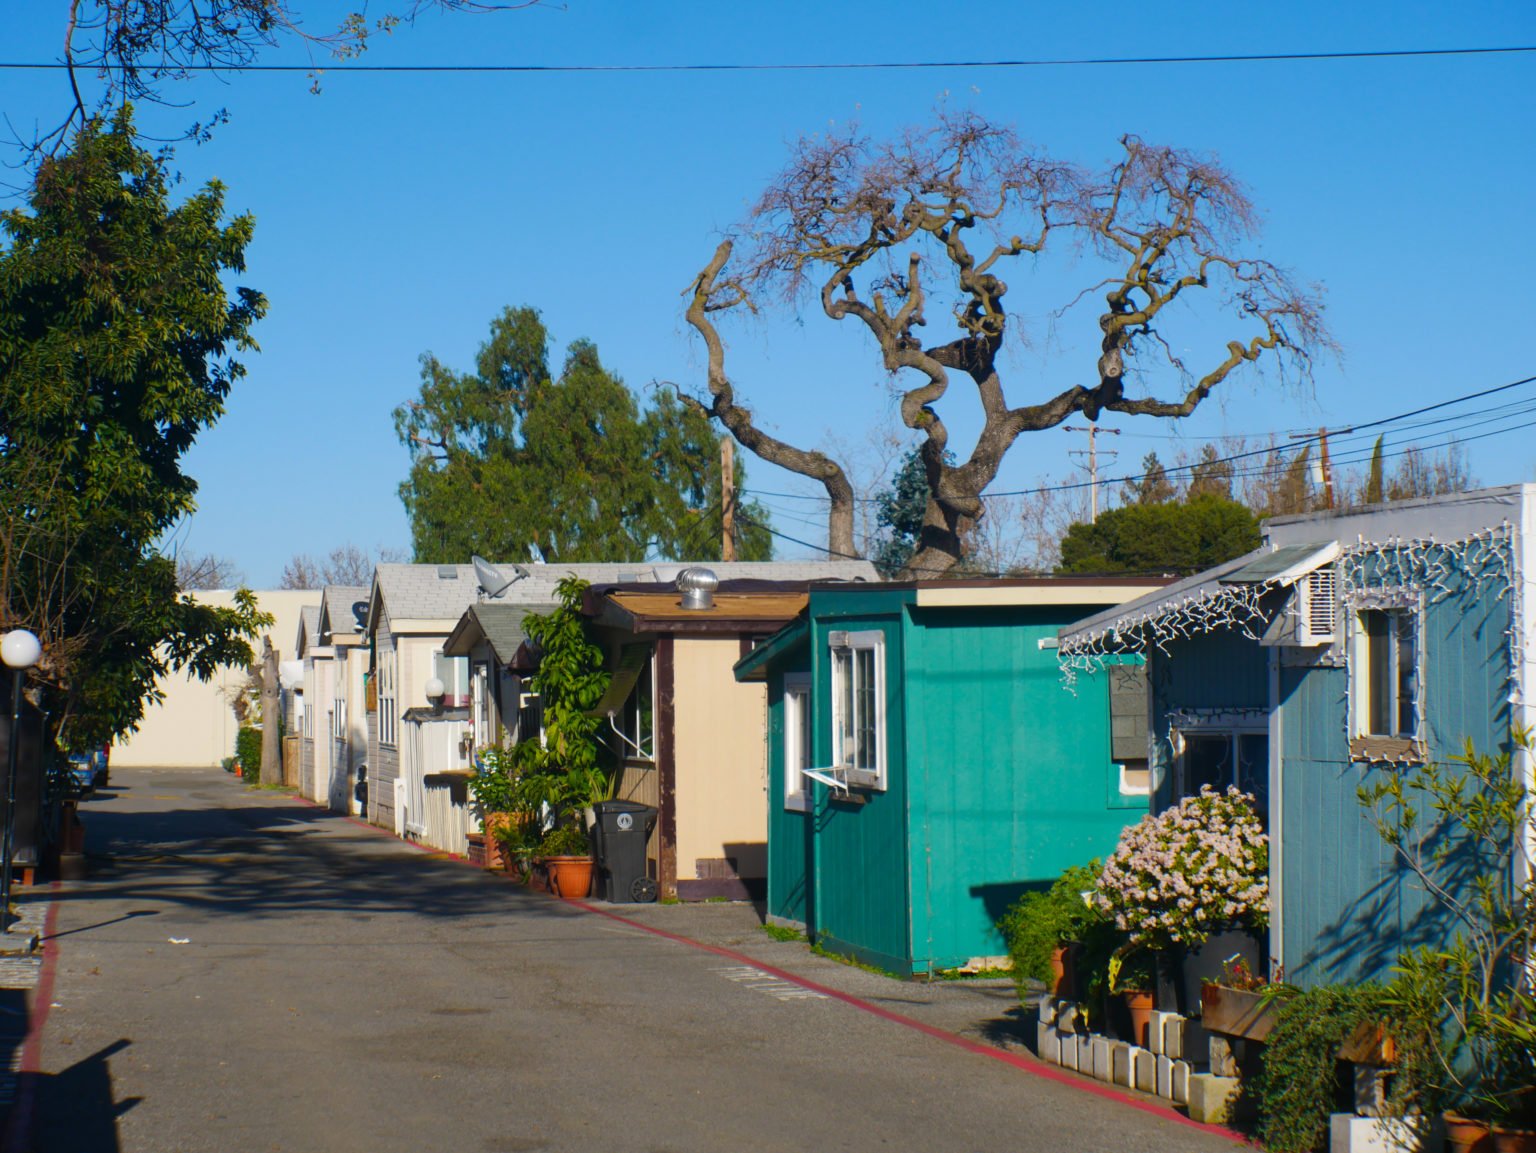 A street in the Buena Vista Mobile Park